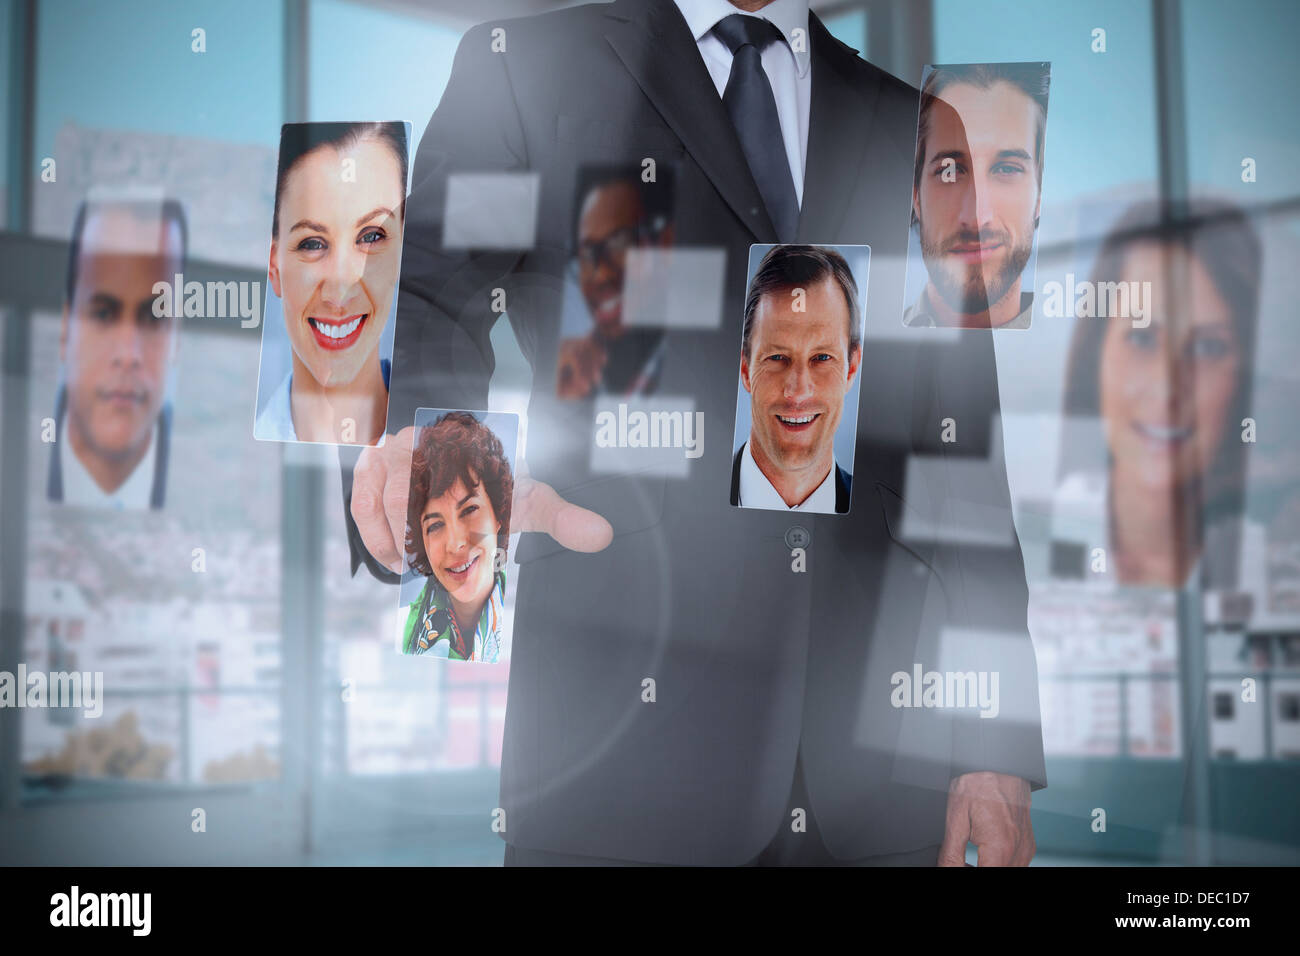 Classy businessman presenting profile pictures Stock Photo